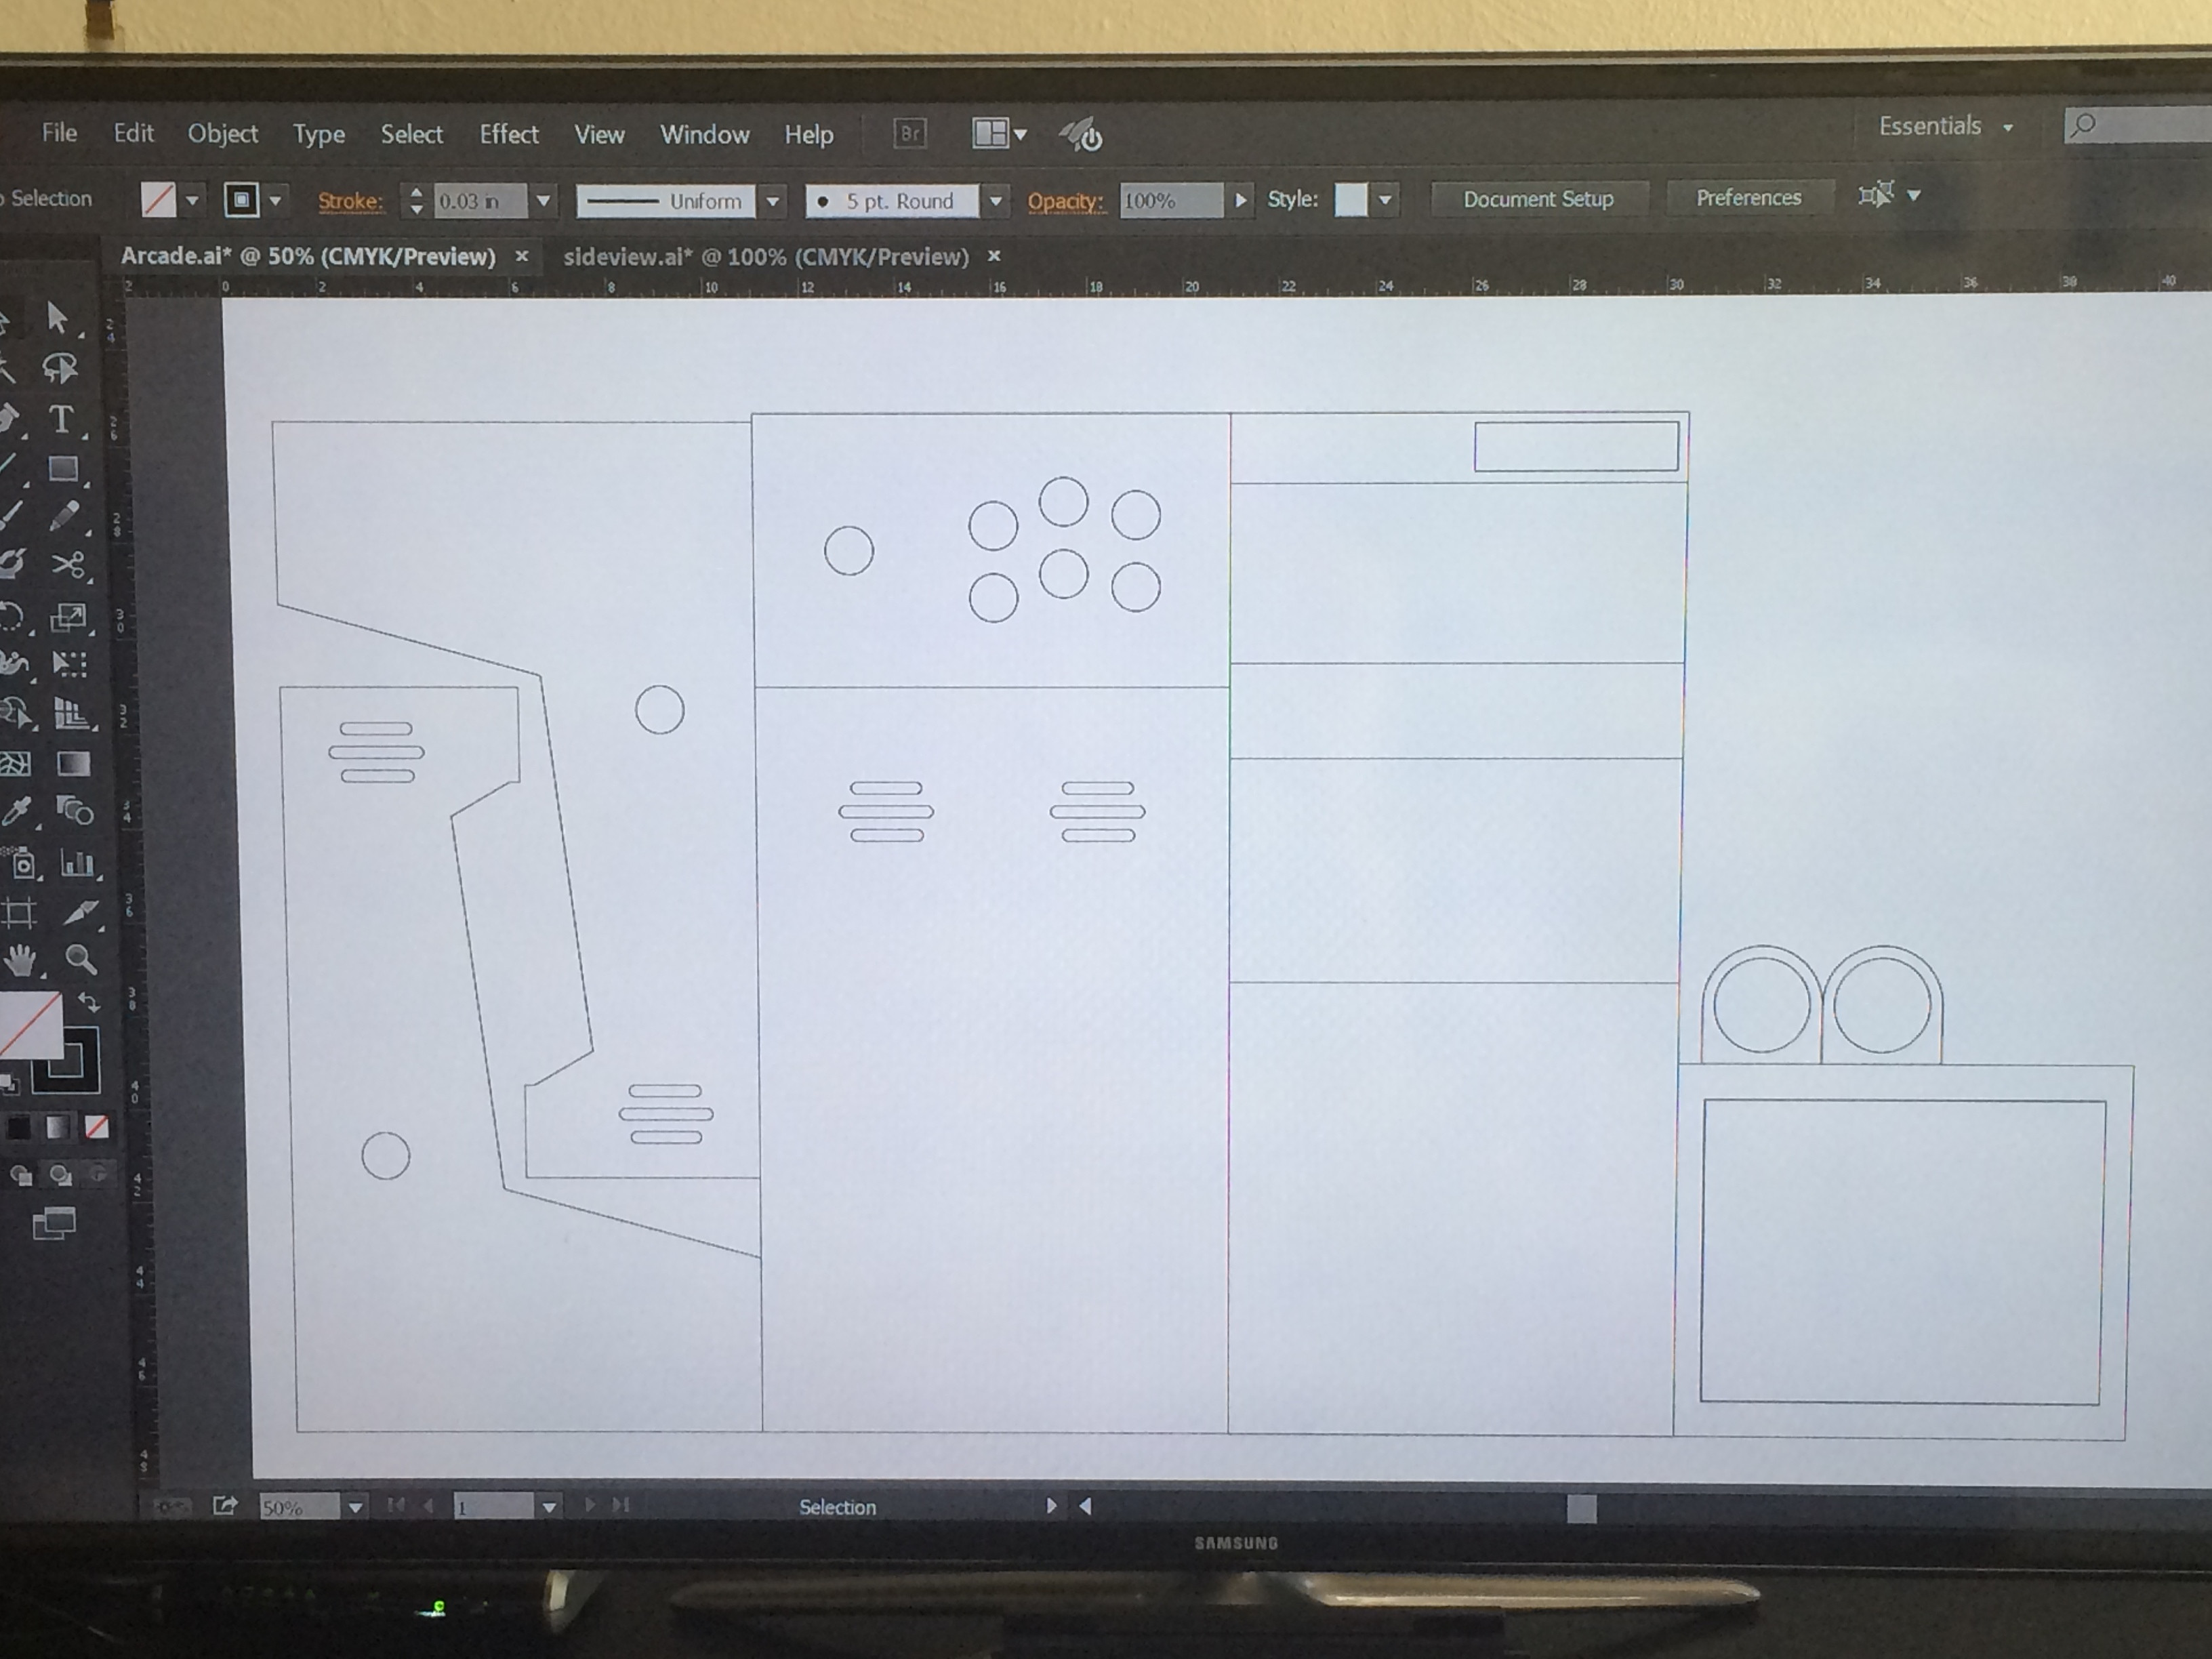 So here are my actual Laser Cut plans I drew up in illustrator. This part took a while to get right, triple measured everything before I finalized my design. I’ll post the .AI files somewhere if you want to copy my project.